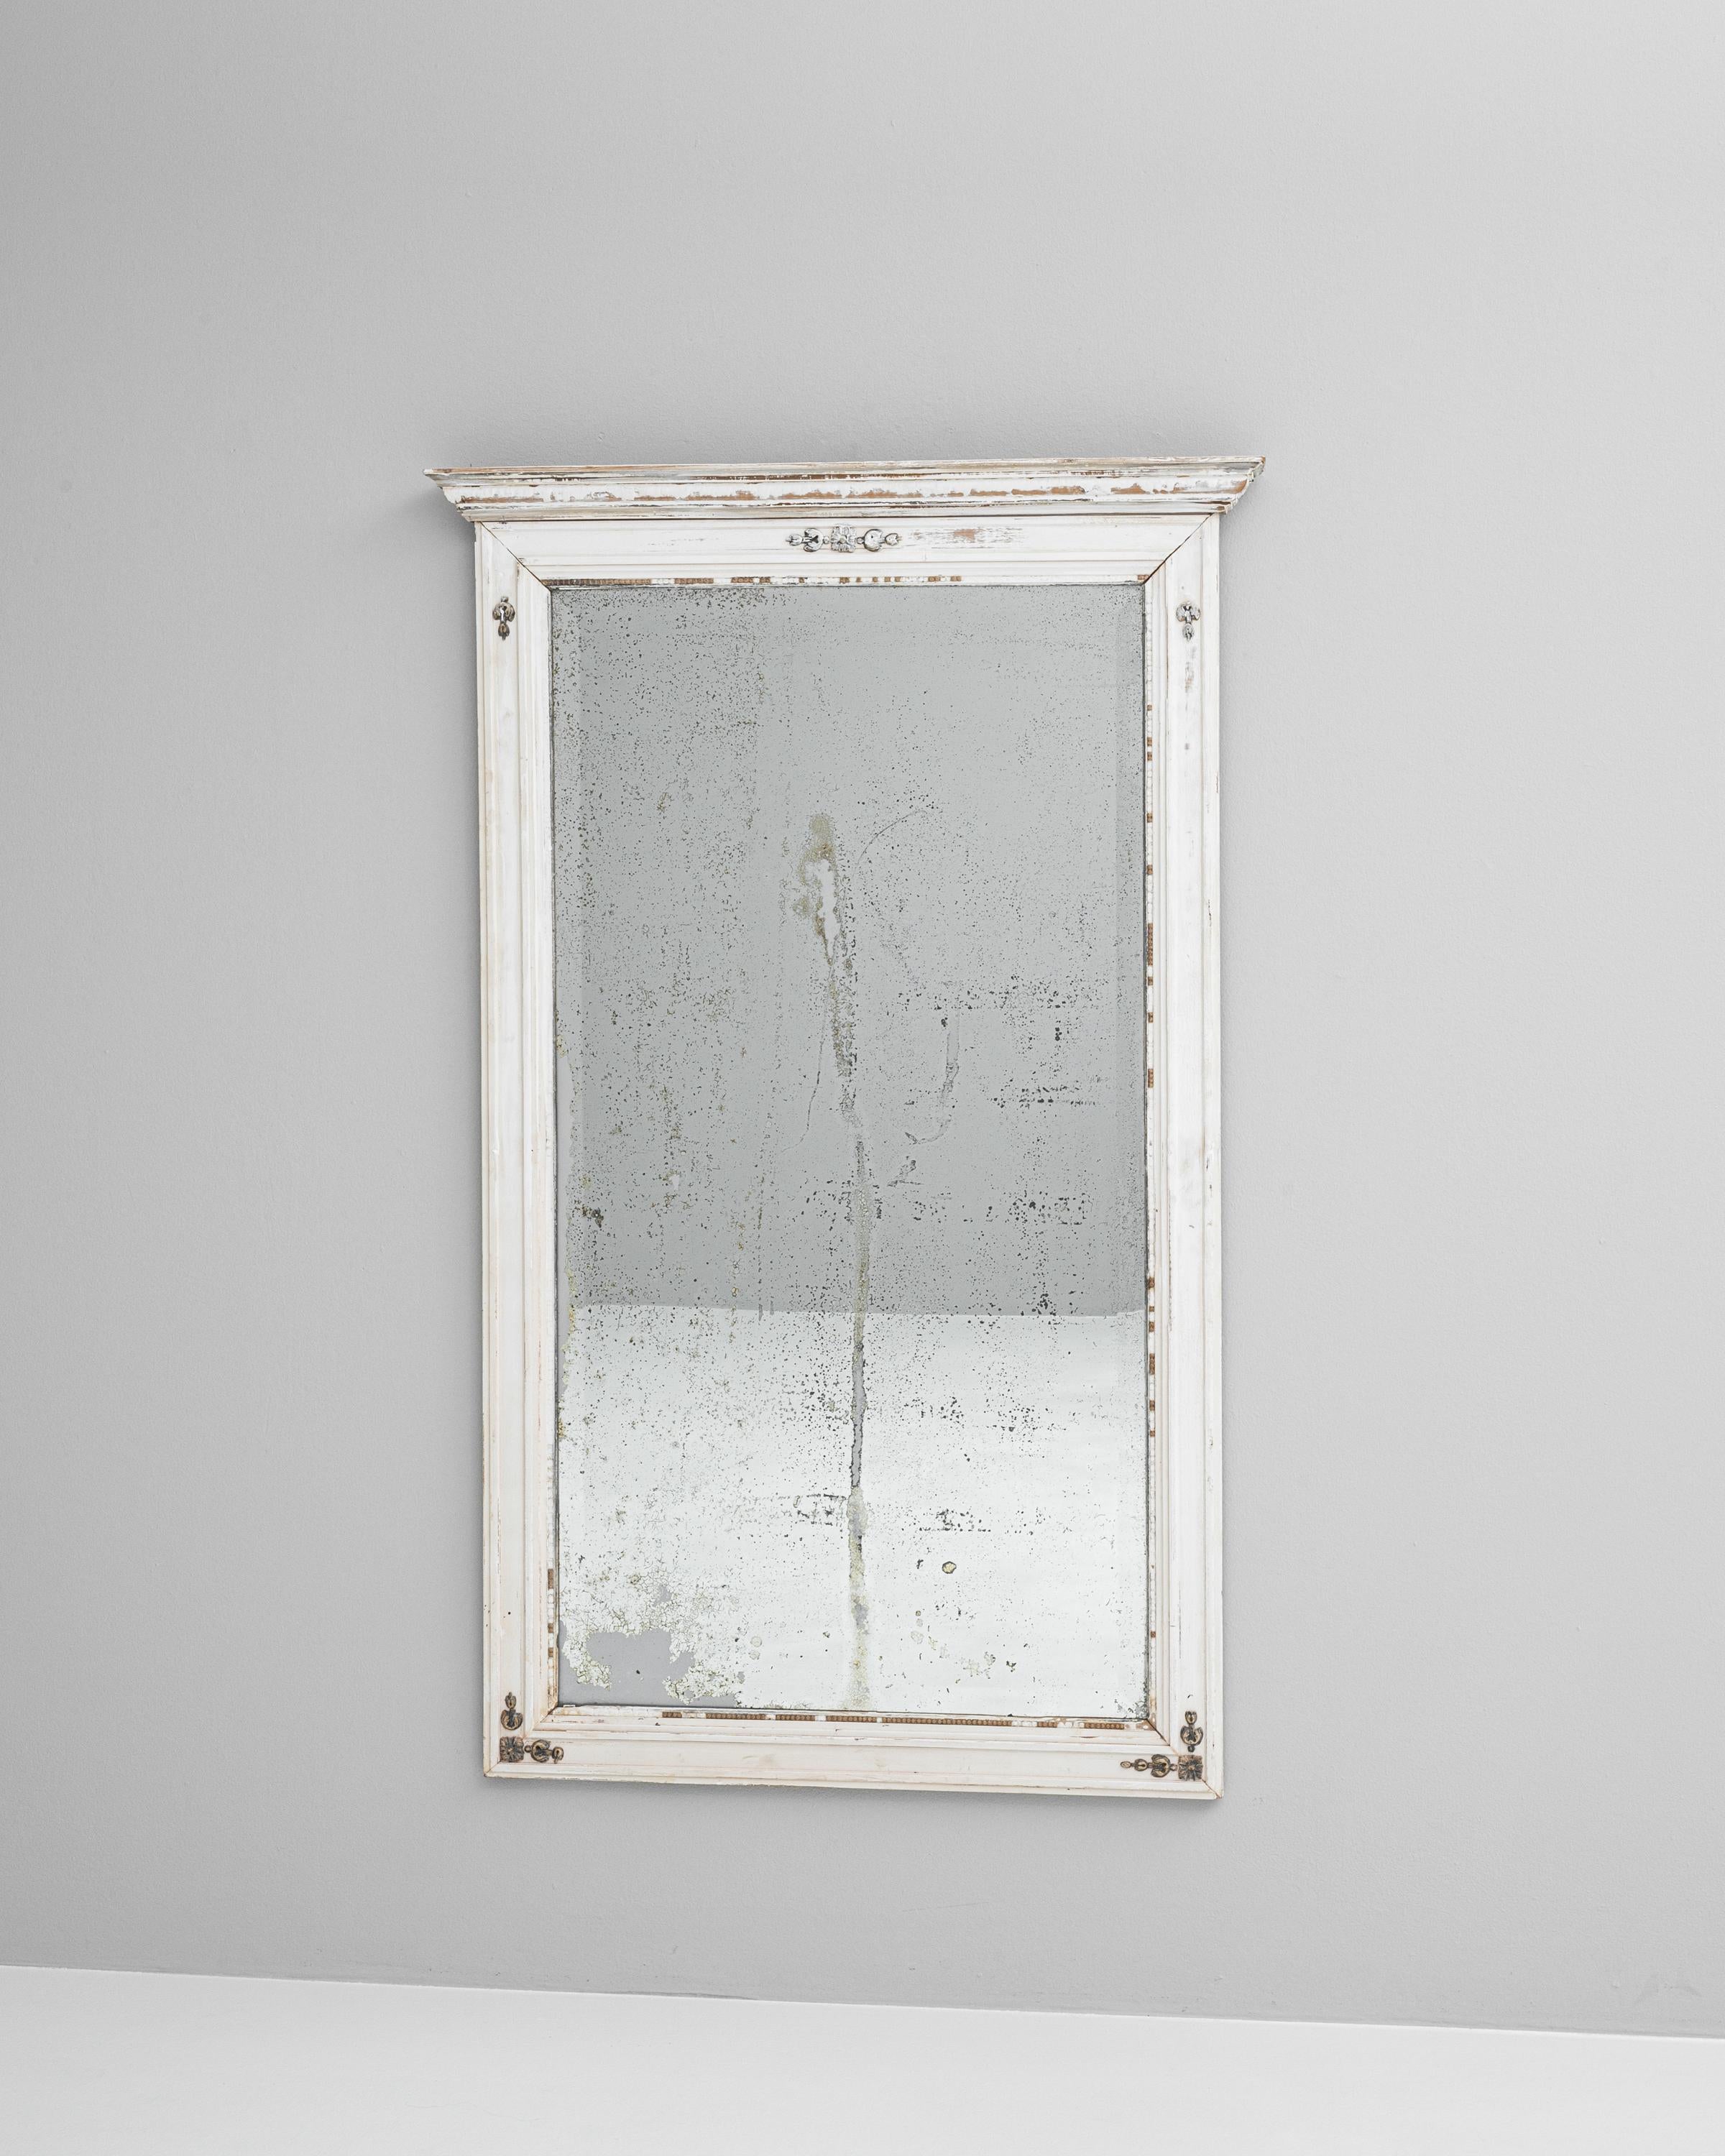 Presenting our exquisite 19th Century French Wood White Patinated Mirror, a treasured relic that exudes vintage charm and character. This mirror is framed in time-worn wood with a creamy white patina, artfully distressed to highlight the beauty of